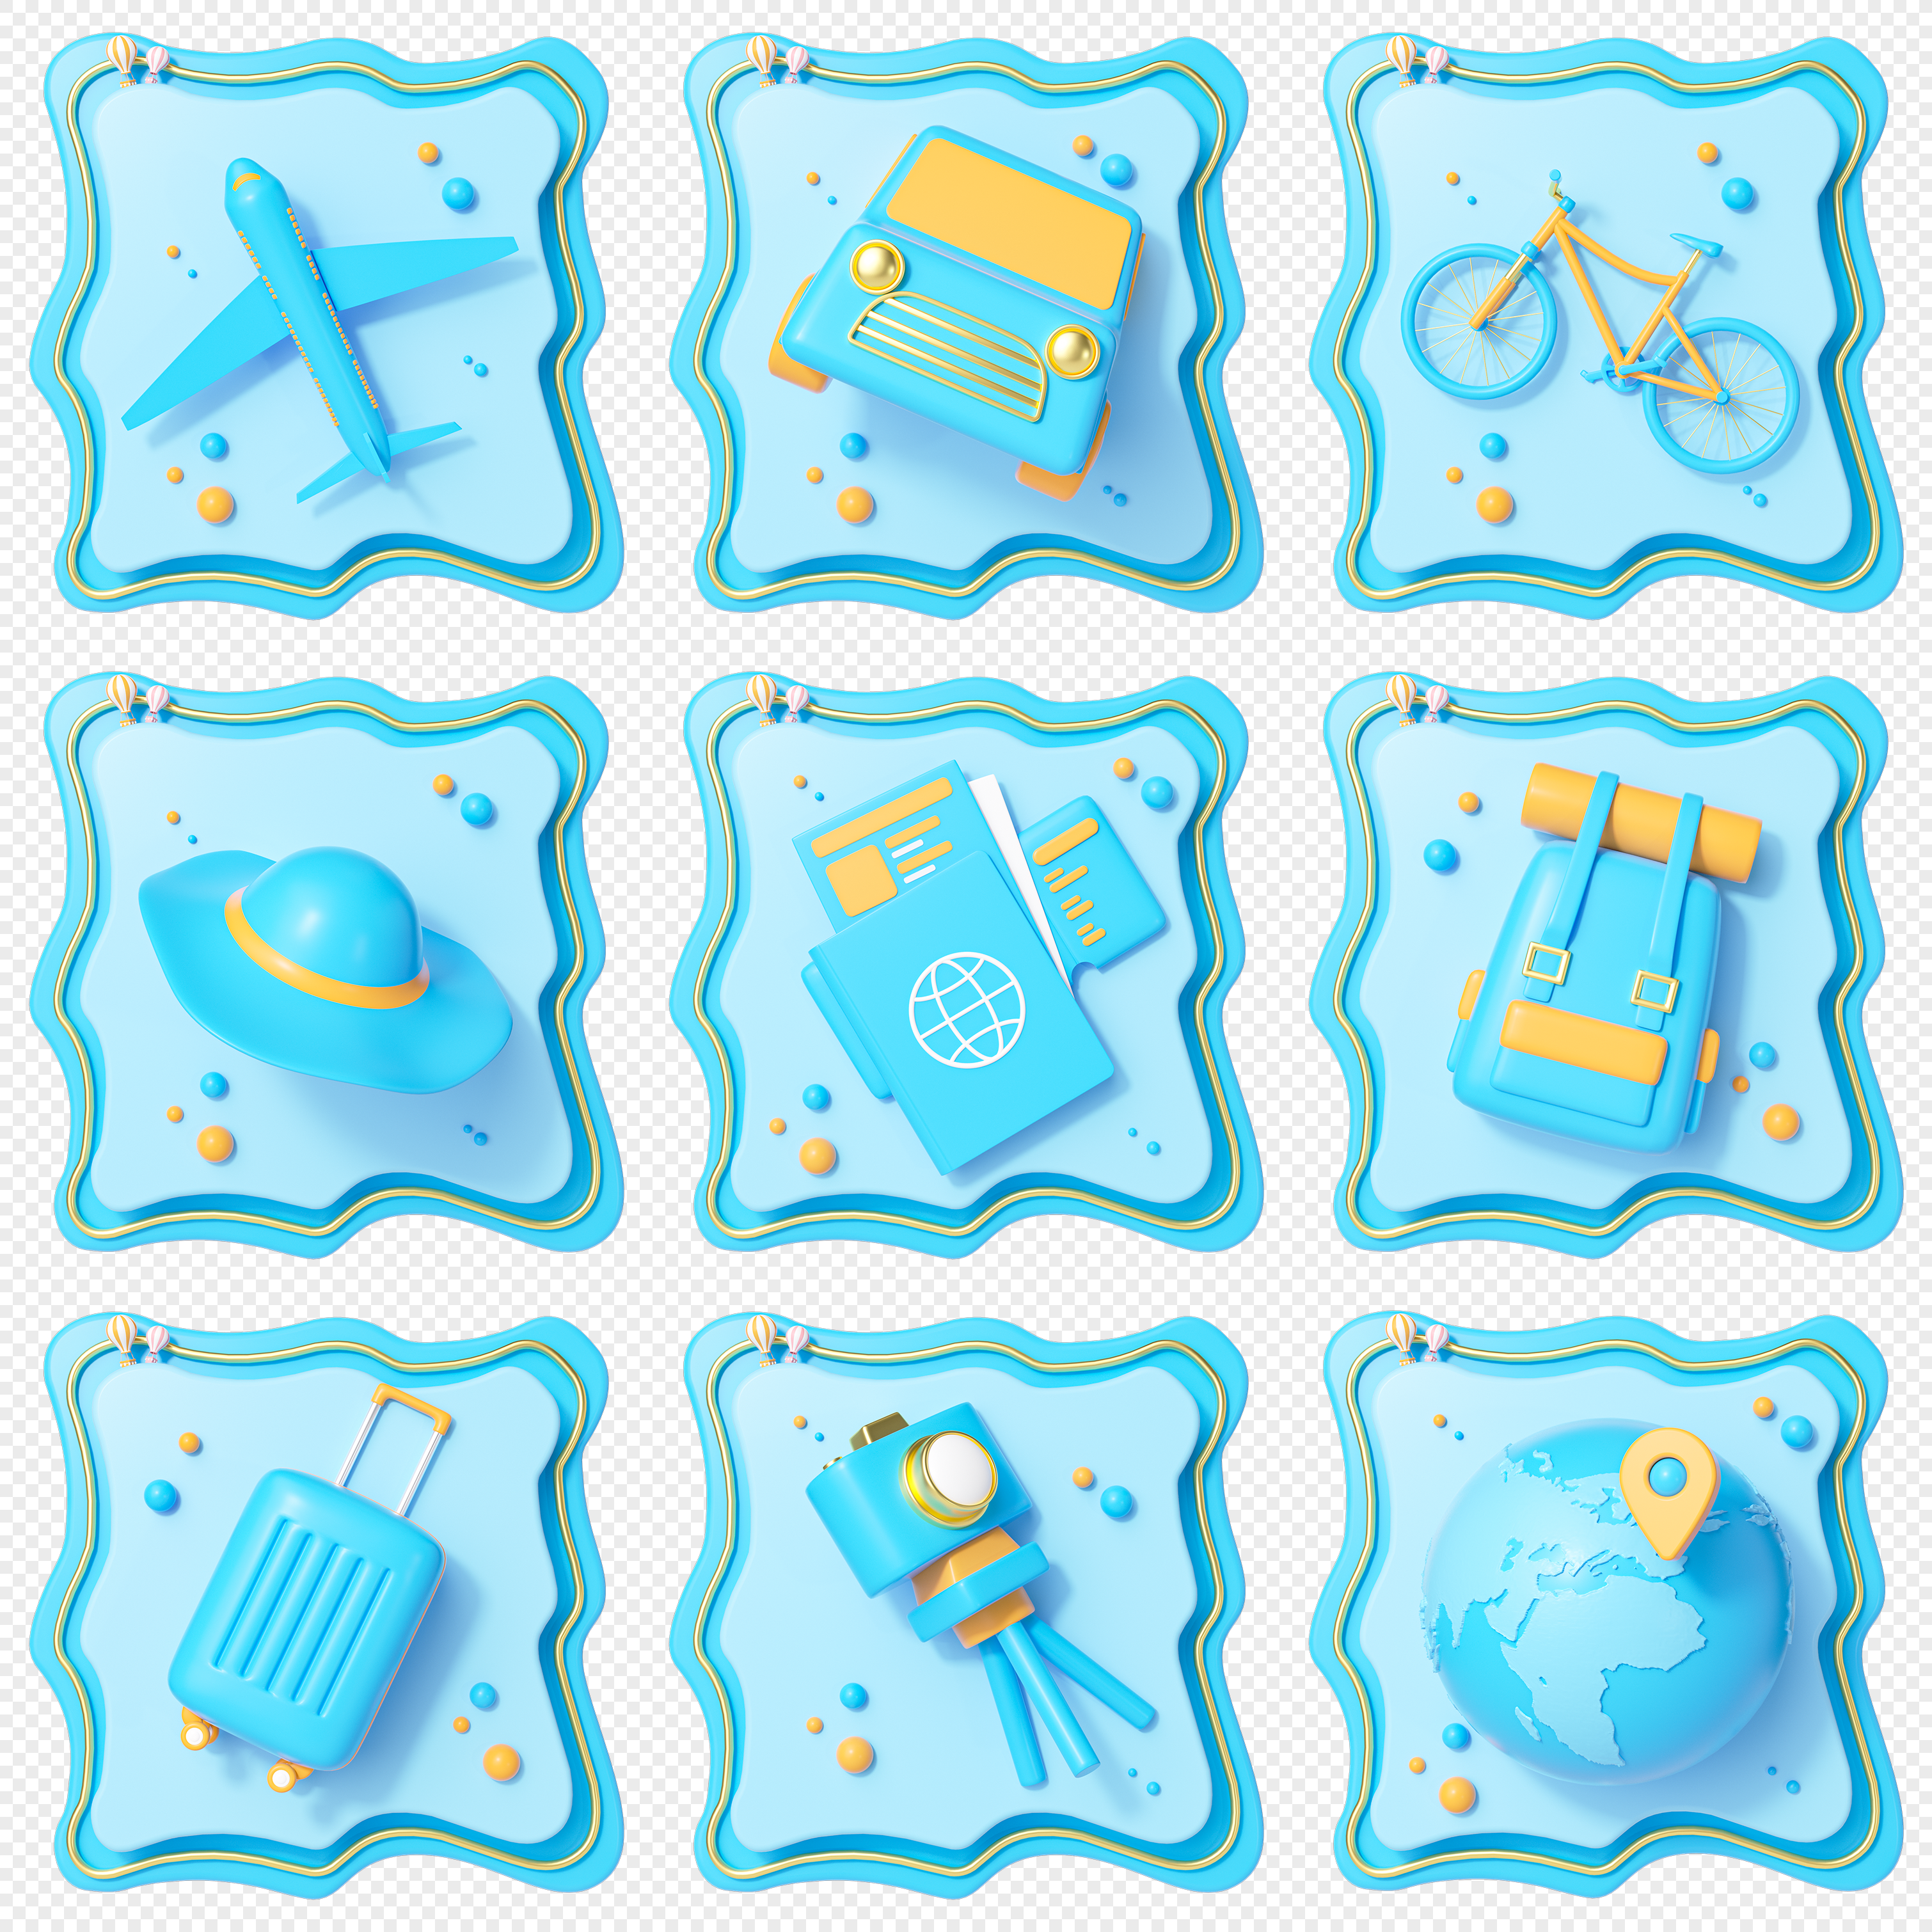 Blue cartoon travel icons combination, icon, cartoon travel, blue icon png hd transparent image